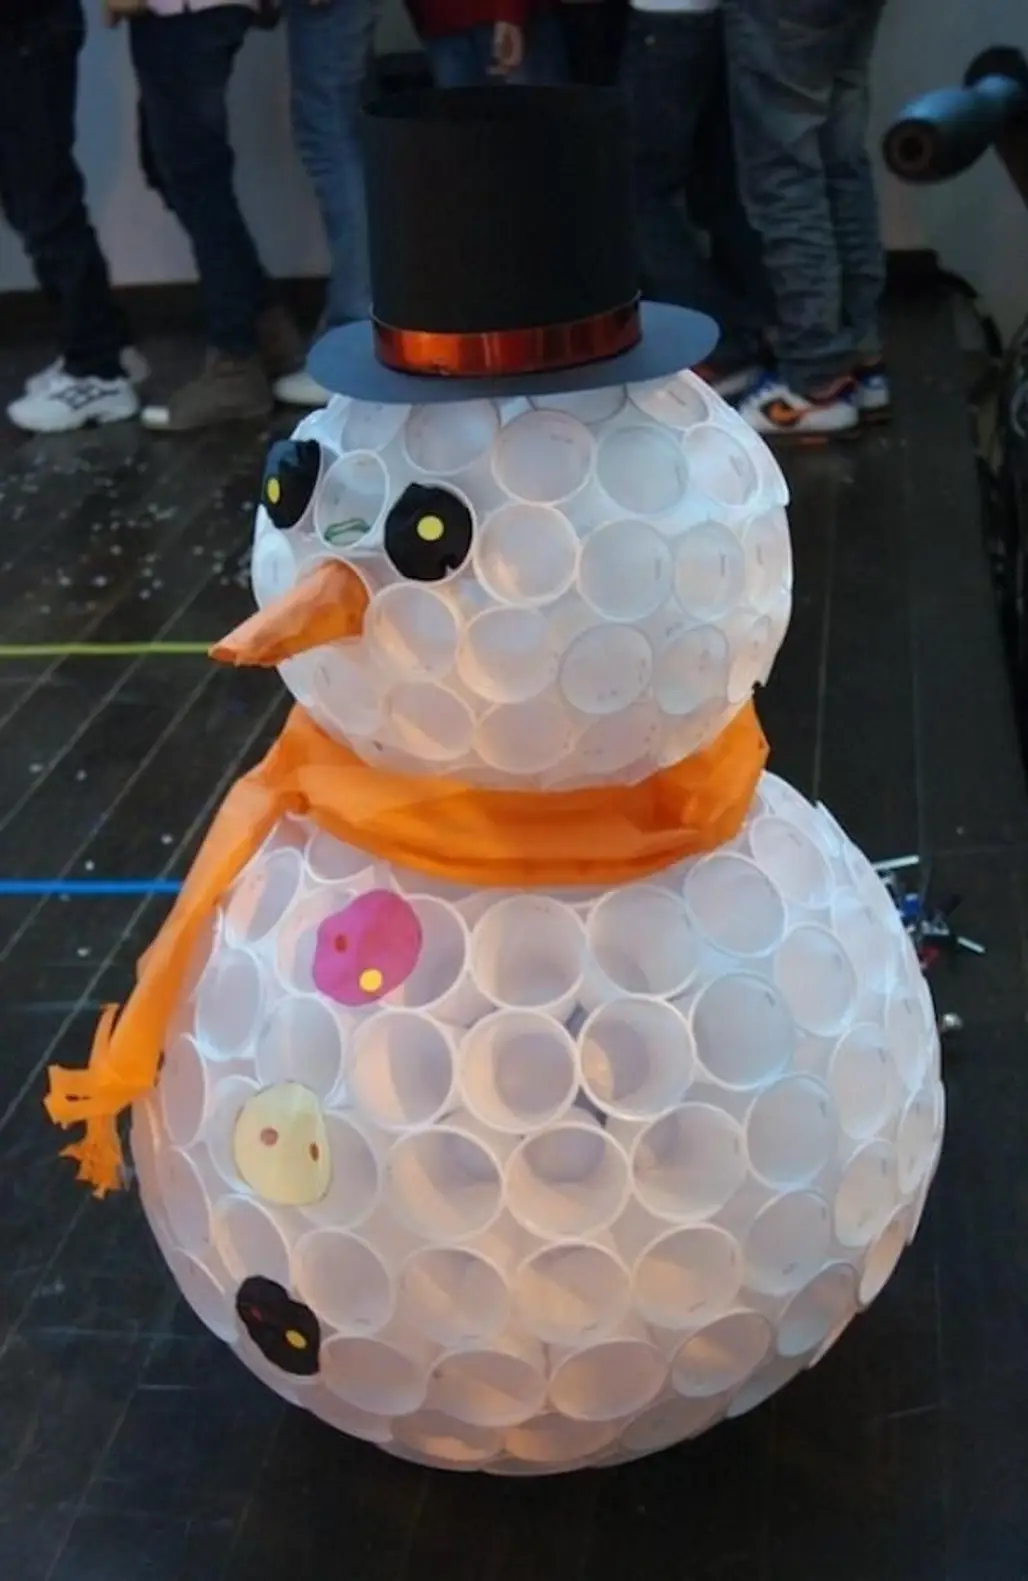 Make a Snowman with Plastic Cups